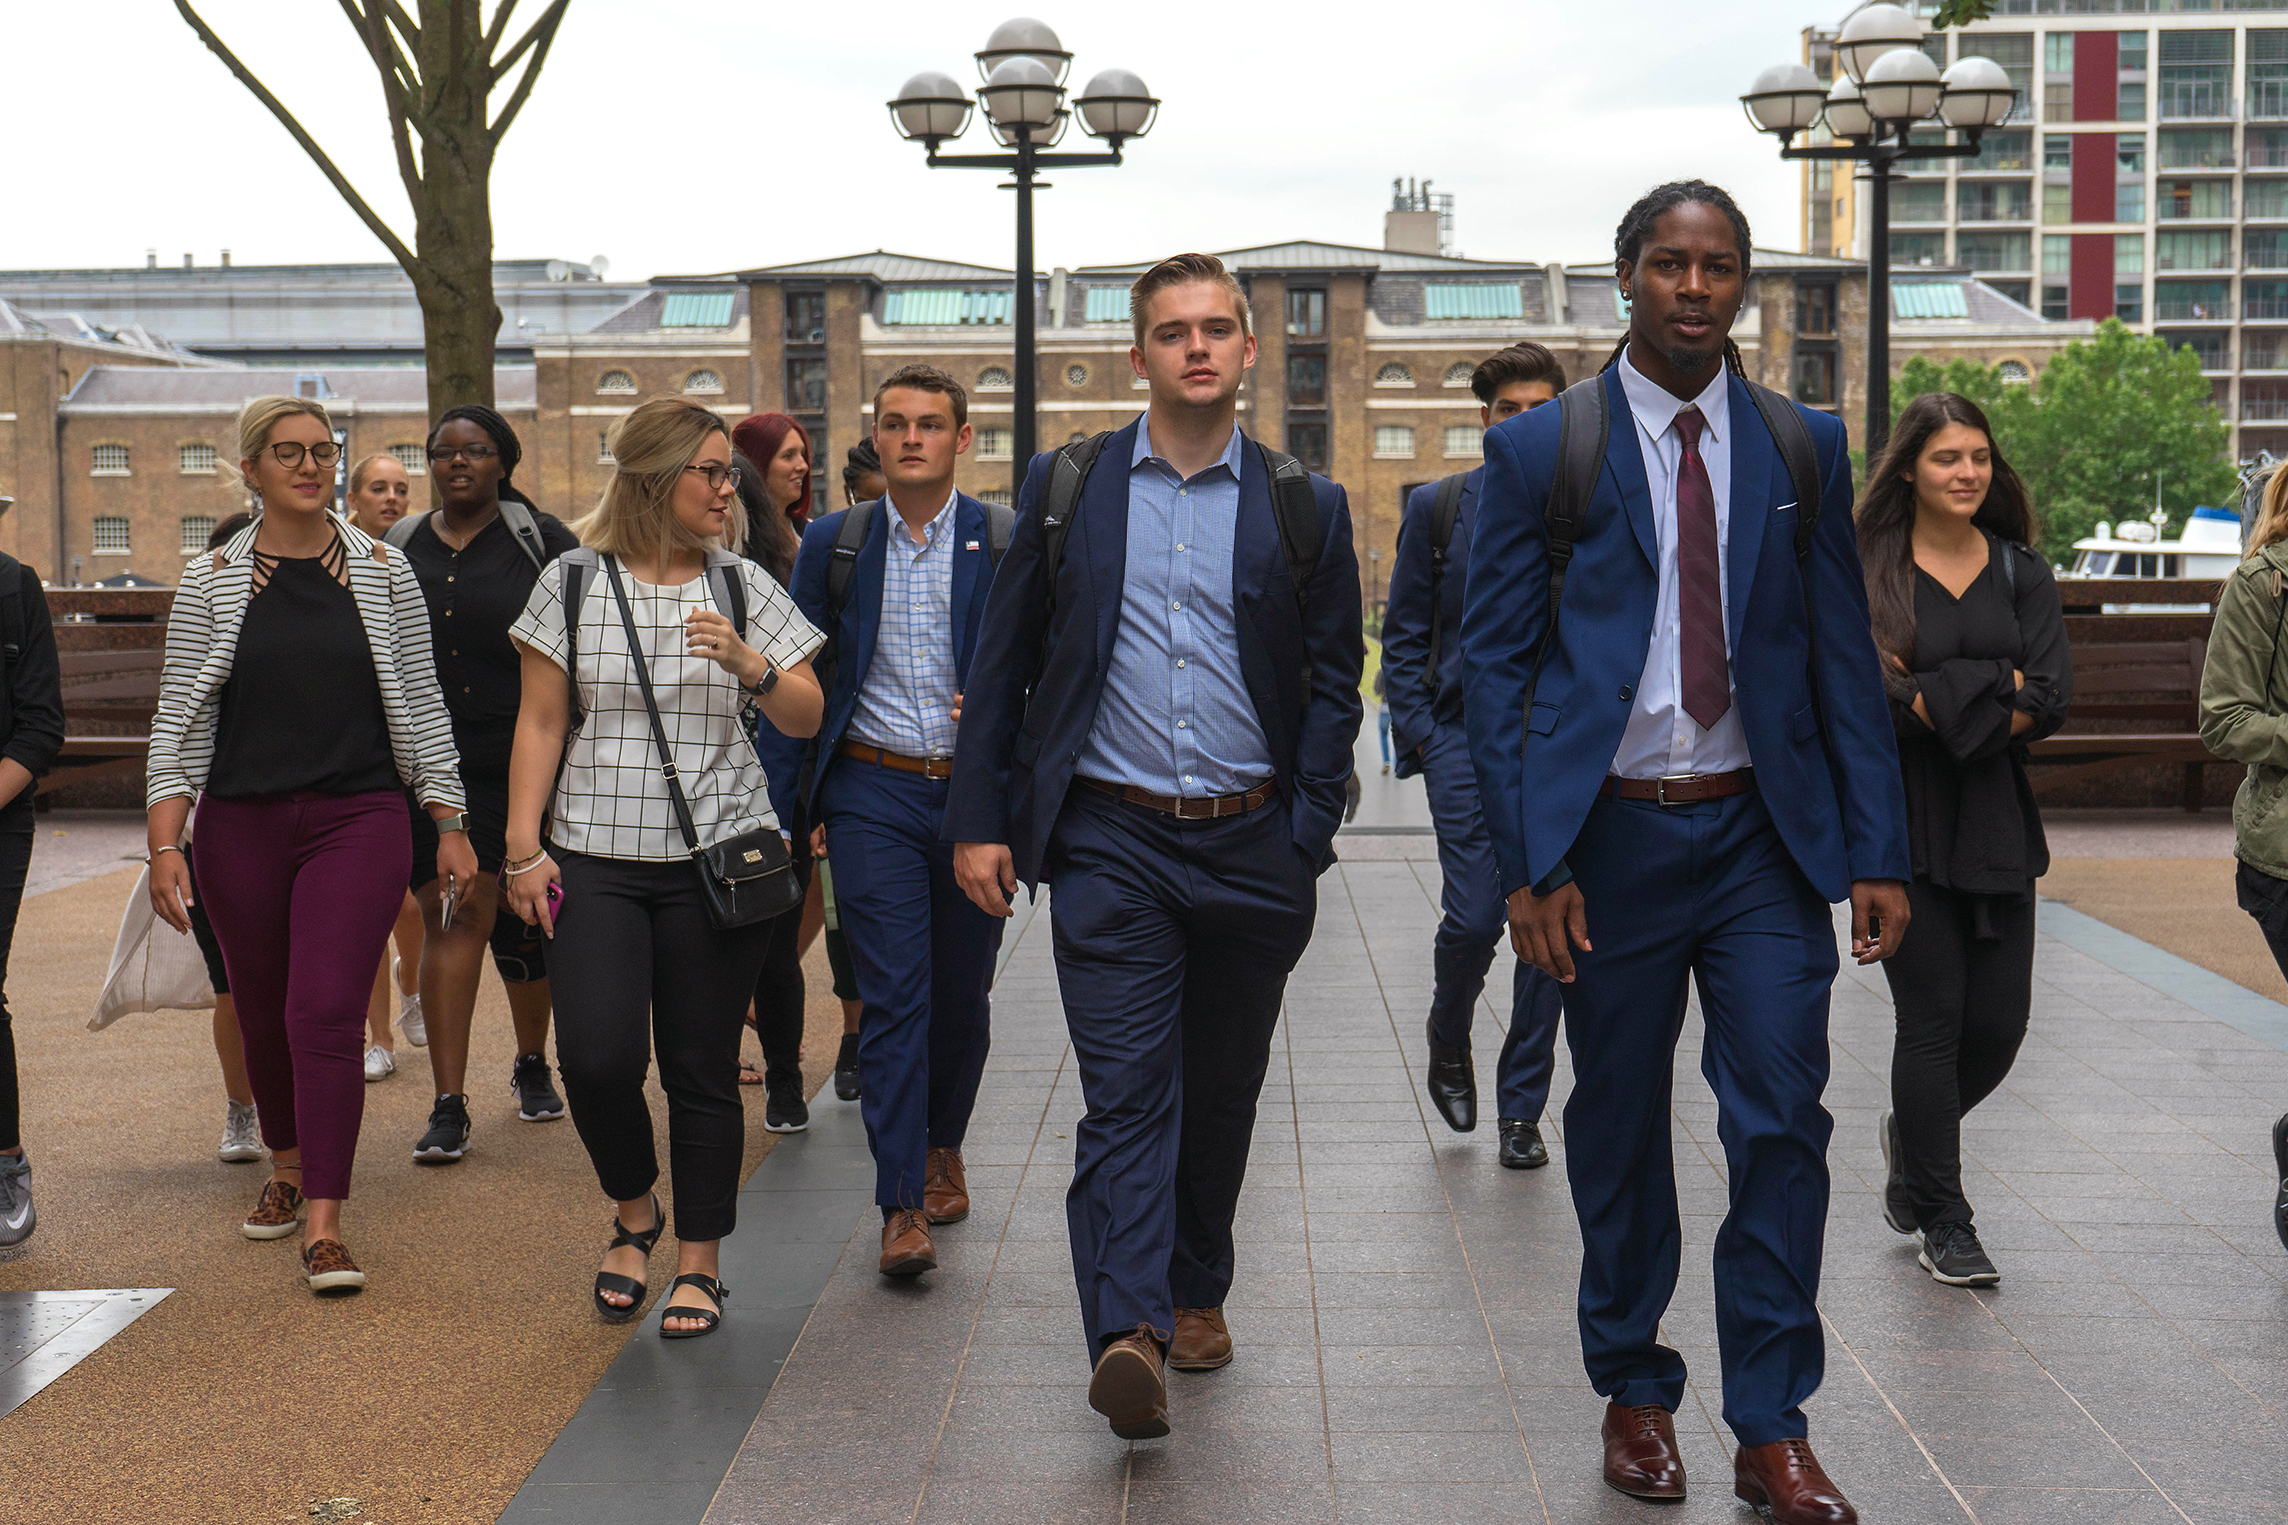 R.J. Sayler with Study Abroad students at Canary Wharf in London.